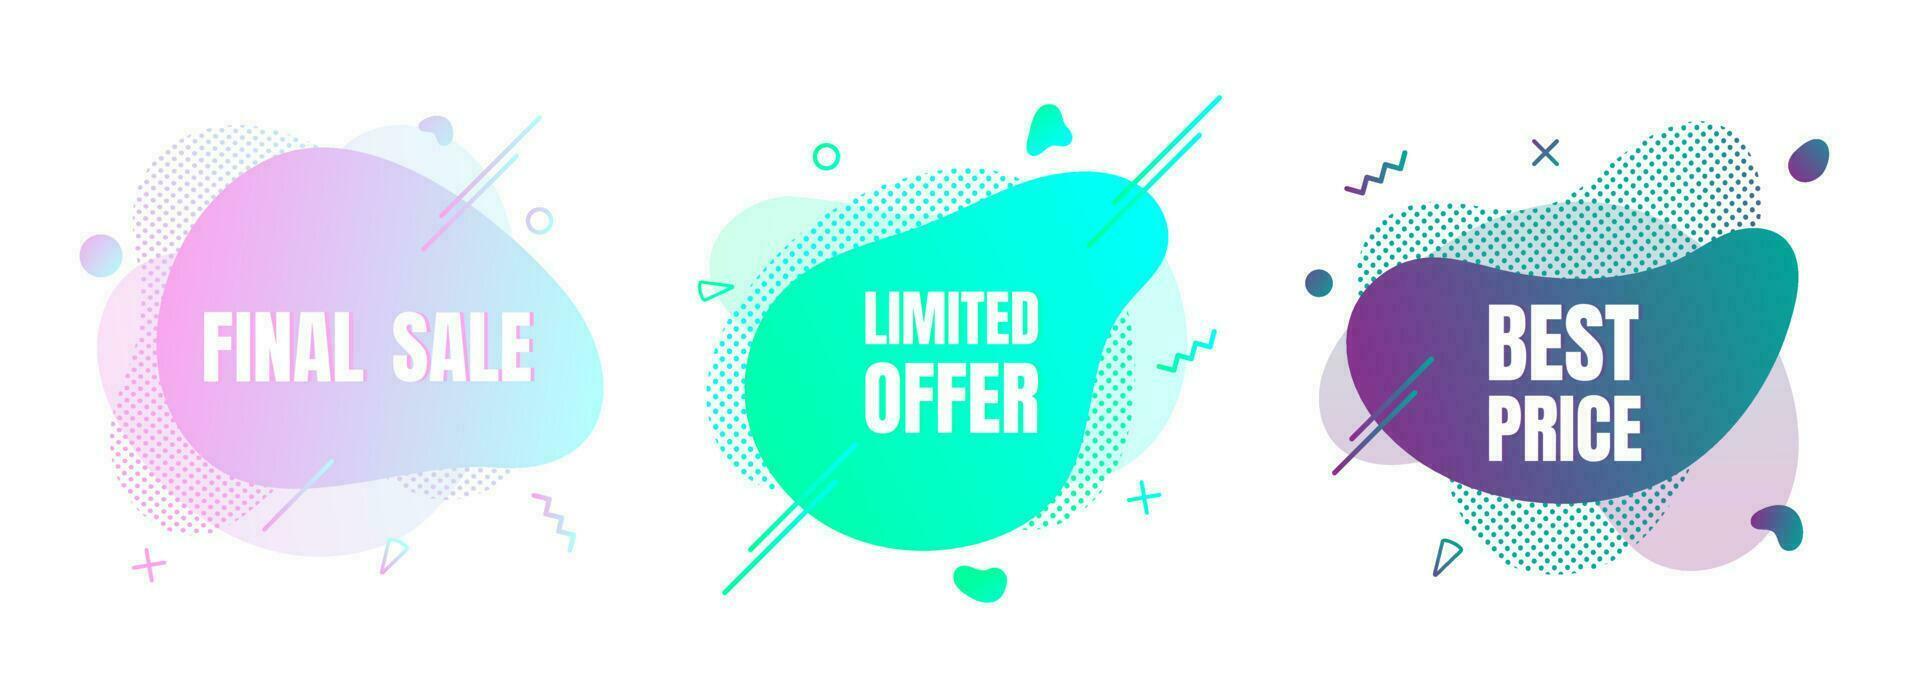 3 modern liquid abstract special offer price sign FINAL SALE, LIMITED OFFER, BEST PRICE text gradient flat style design fluid vector colorful vector illustration banner simple shape advertising.